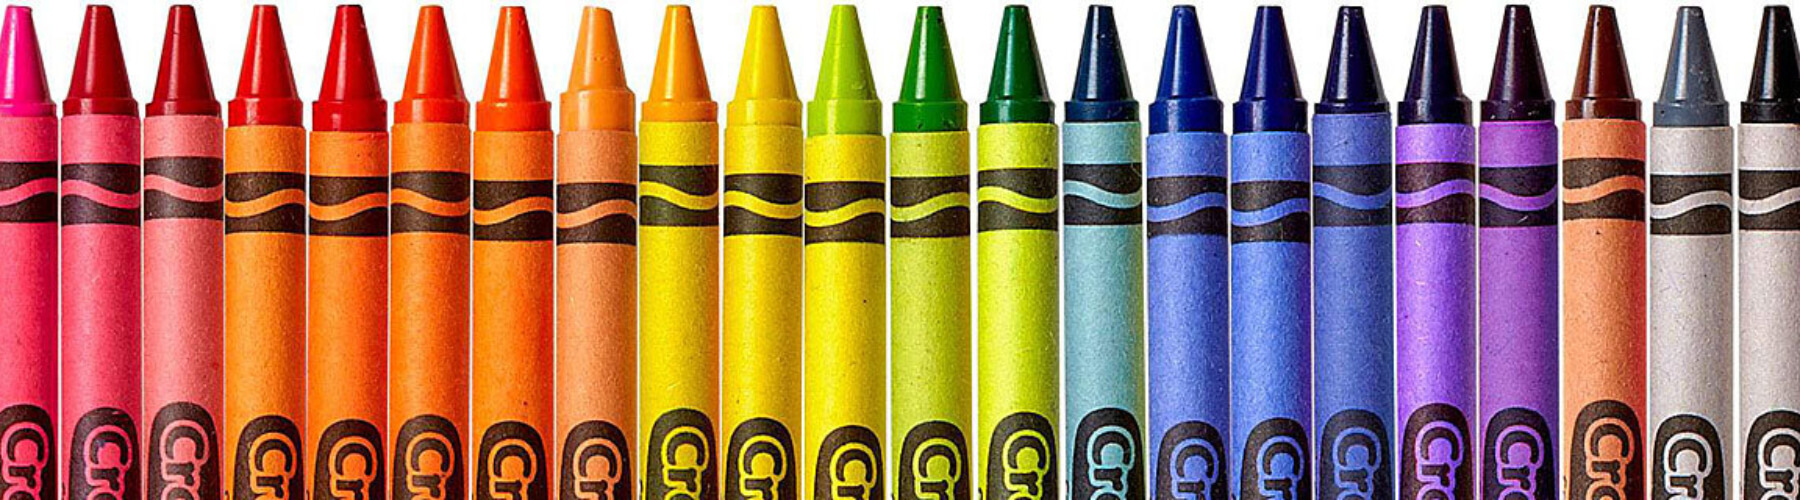 All colors of crayons lined up 